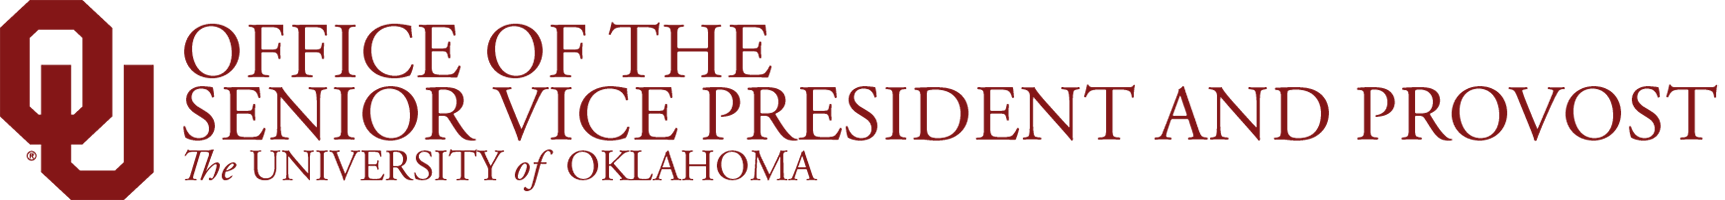 OU Office of the Senior Vice President and Provost, The University of Oklahoma wordmark